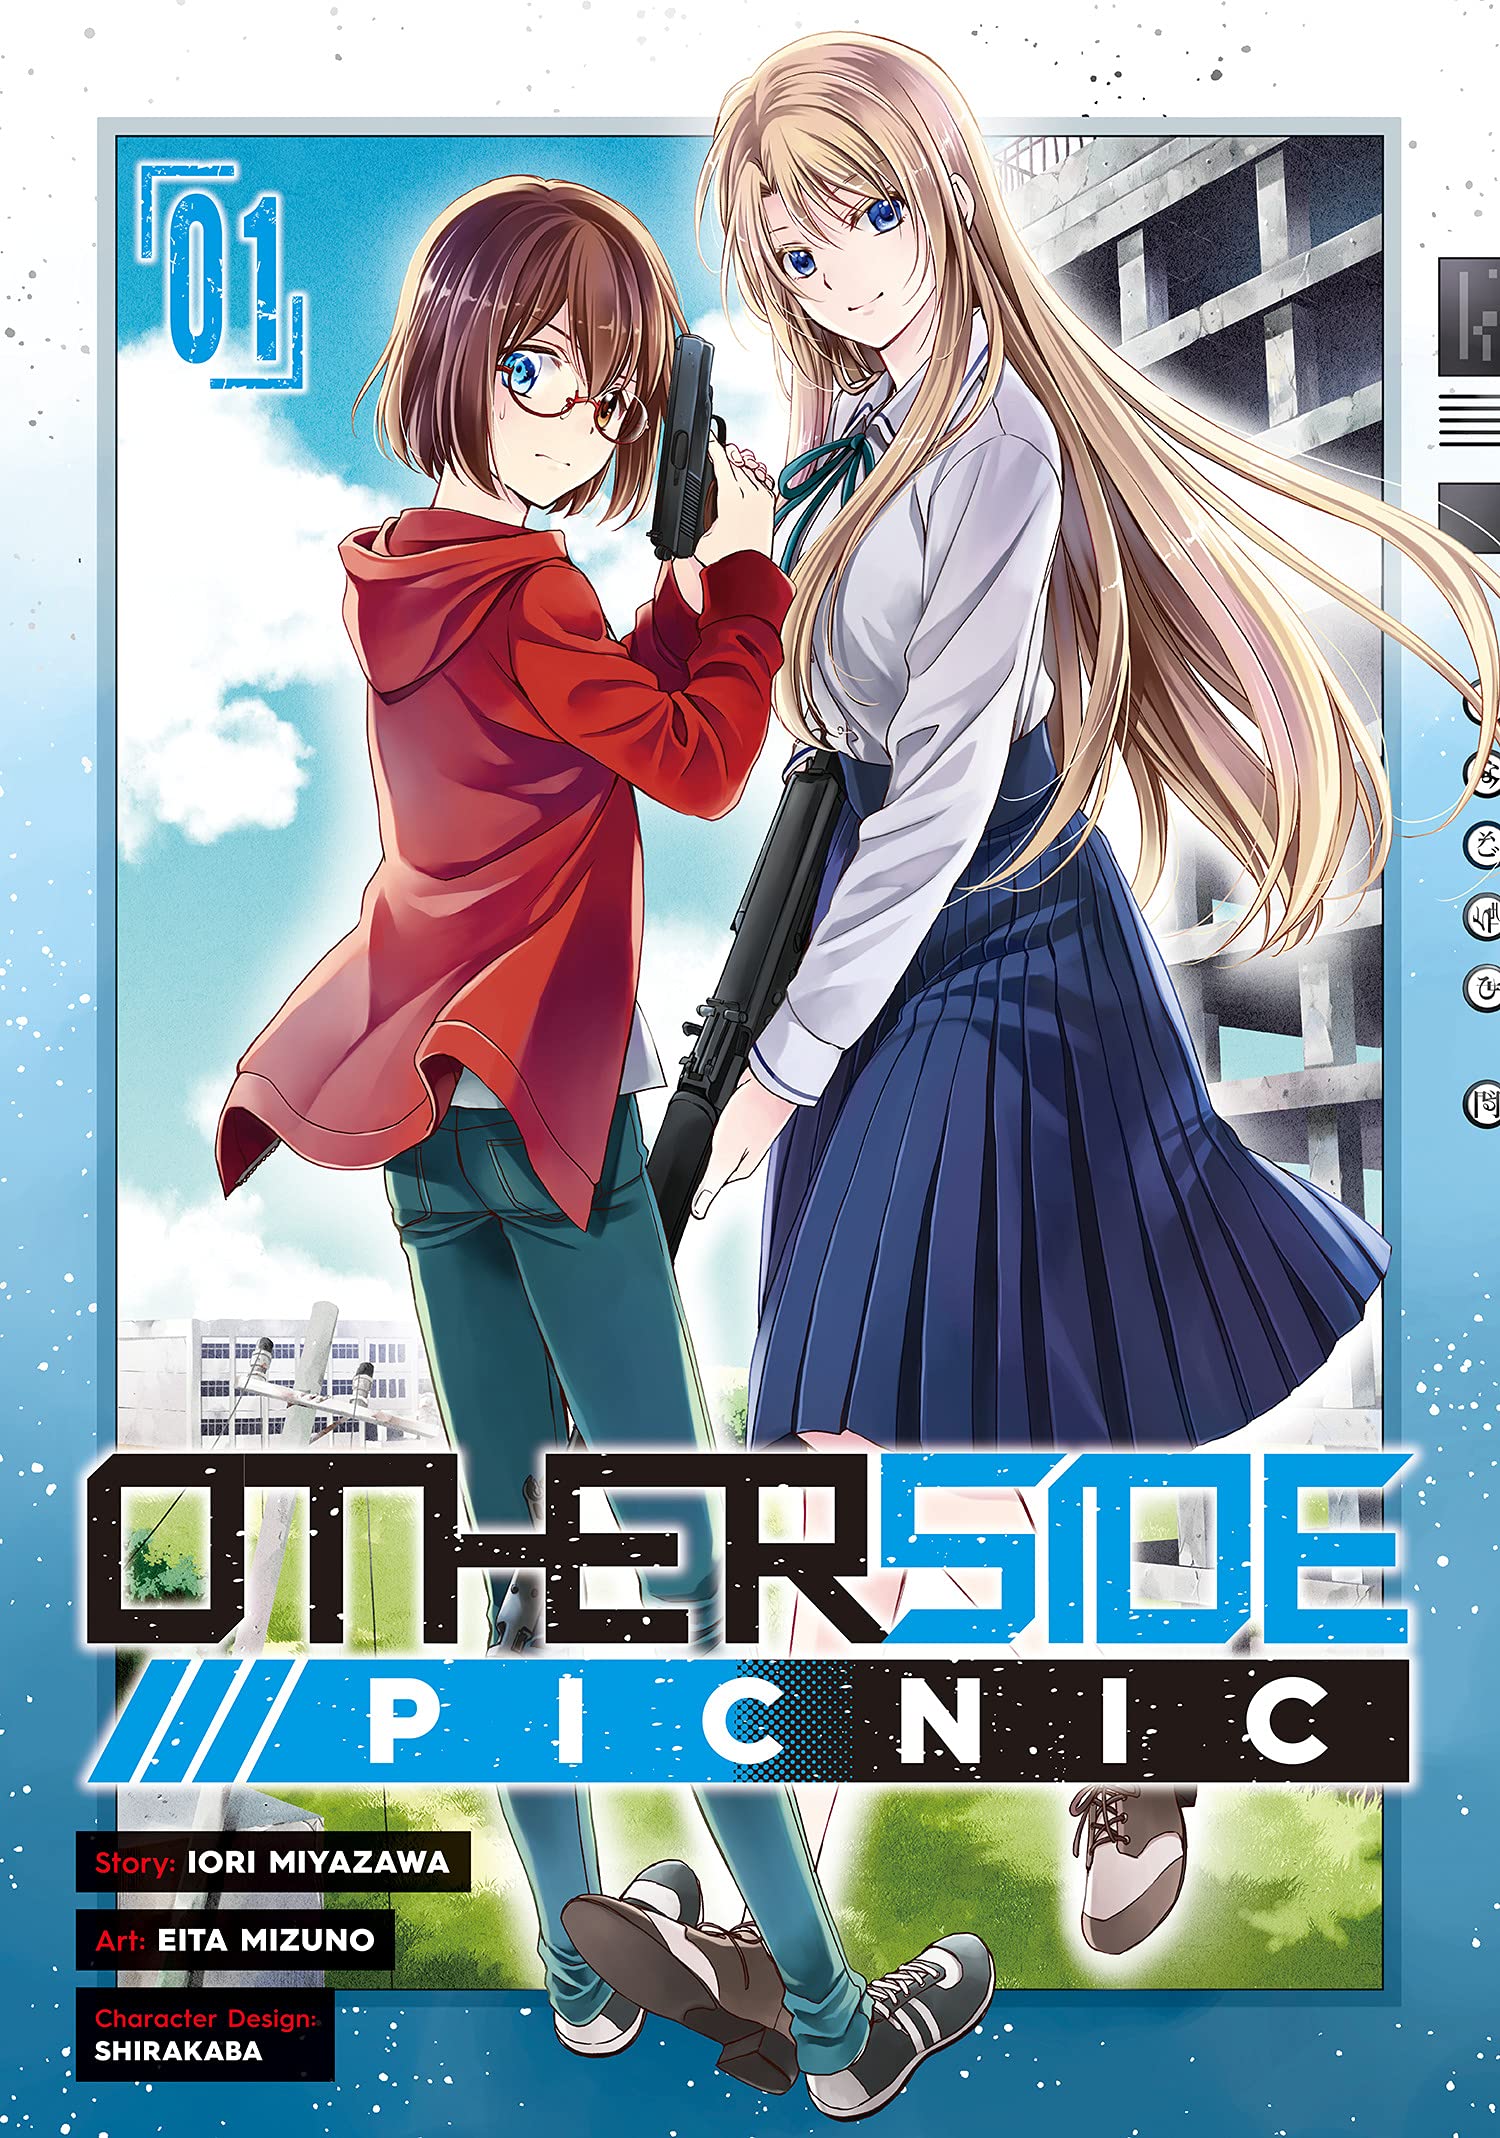 Anime Review: Otherside Picnic